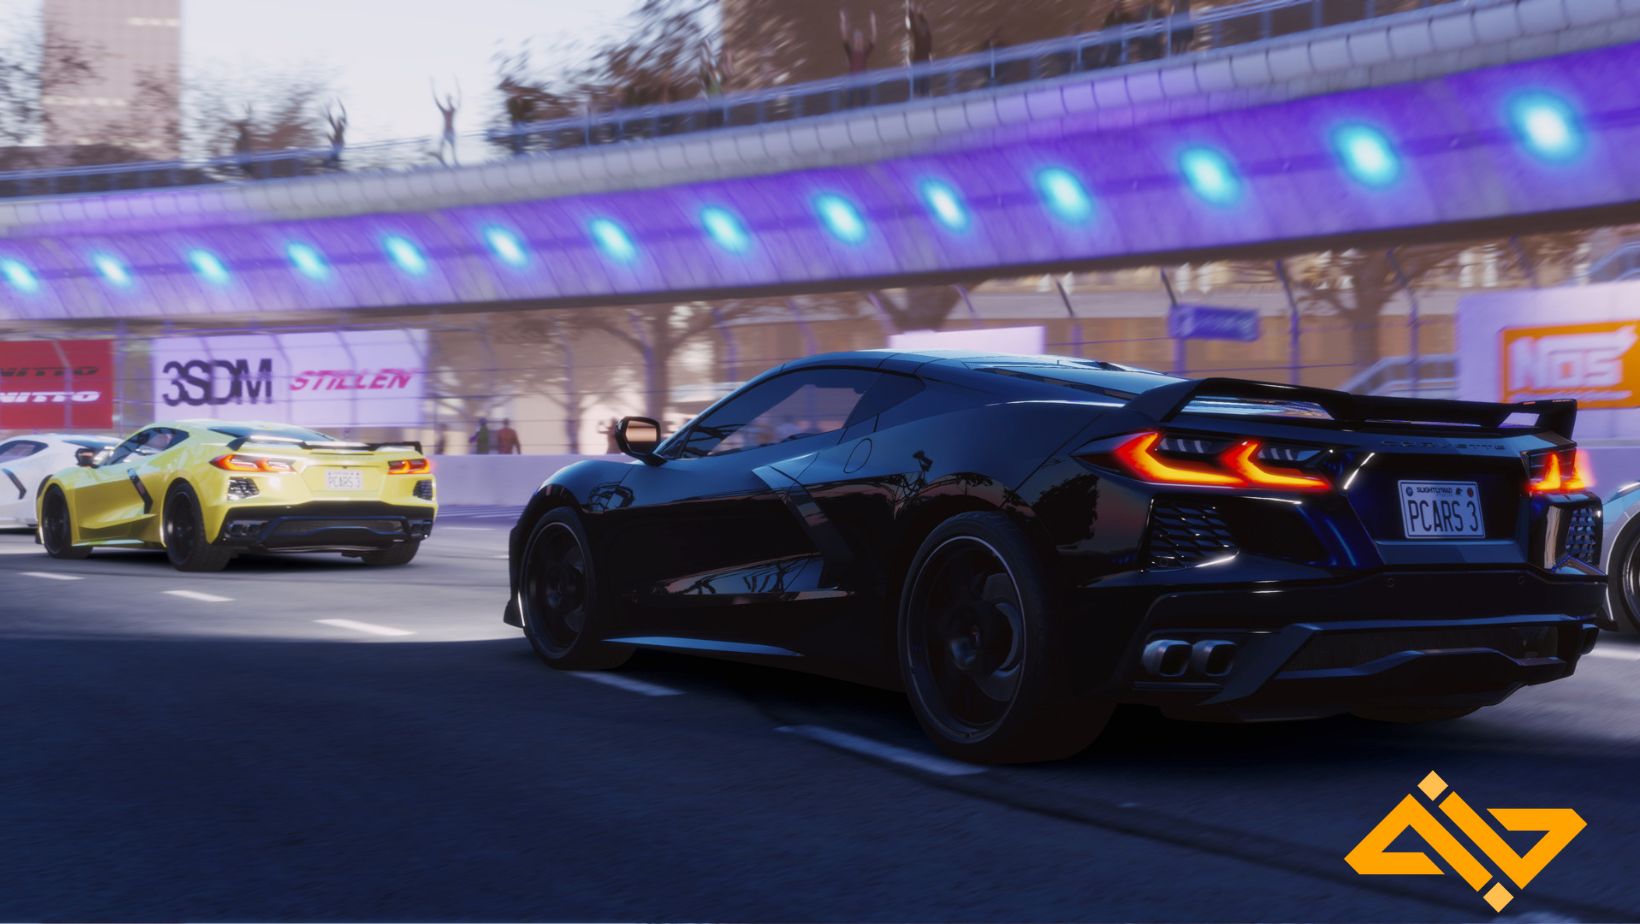 Project CARS 3 is a simulation racing game that emphasizes "authentic racing".